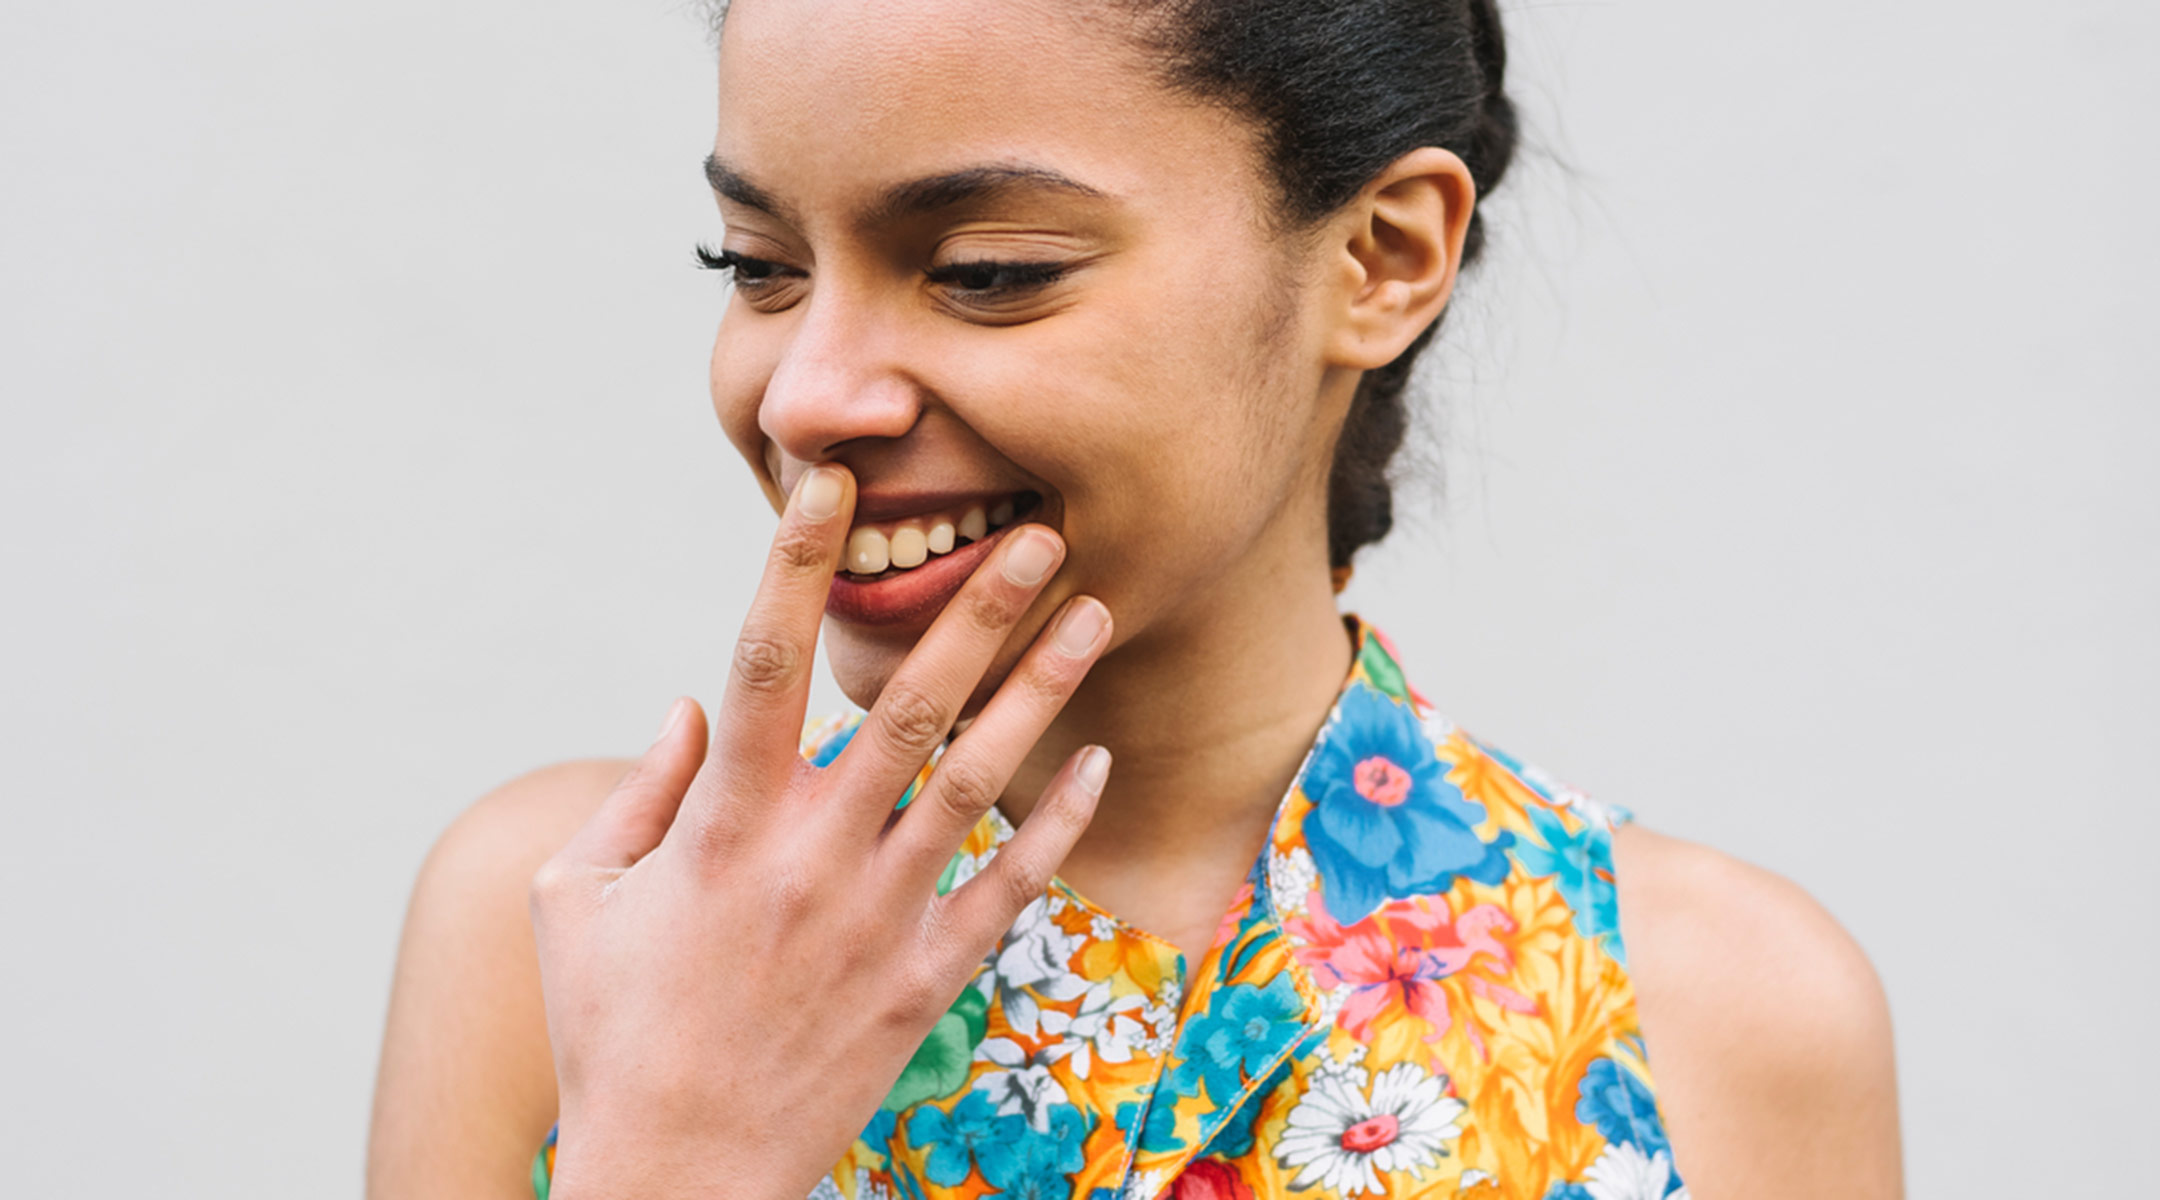 woman smiling laughing hand over mouth